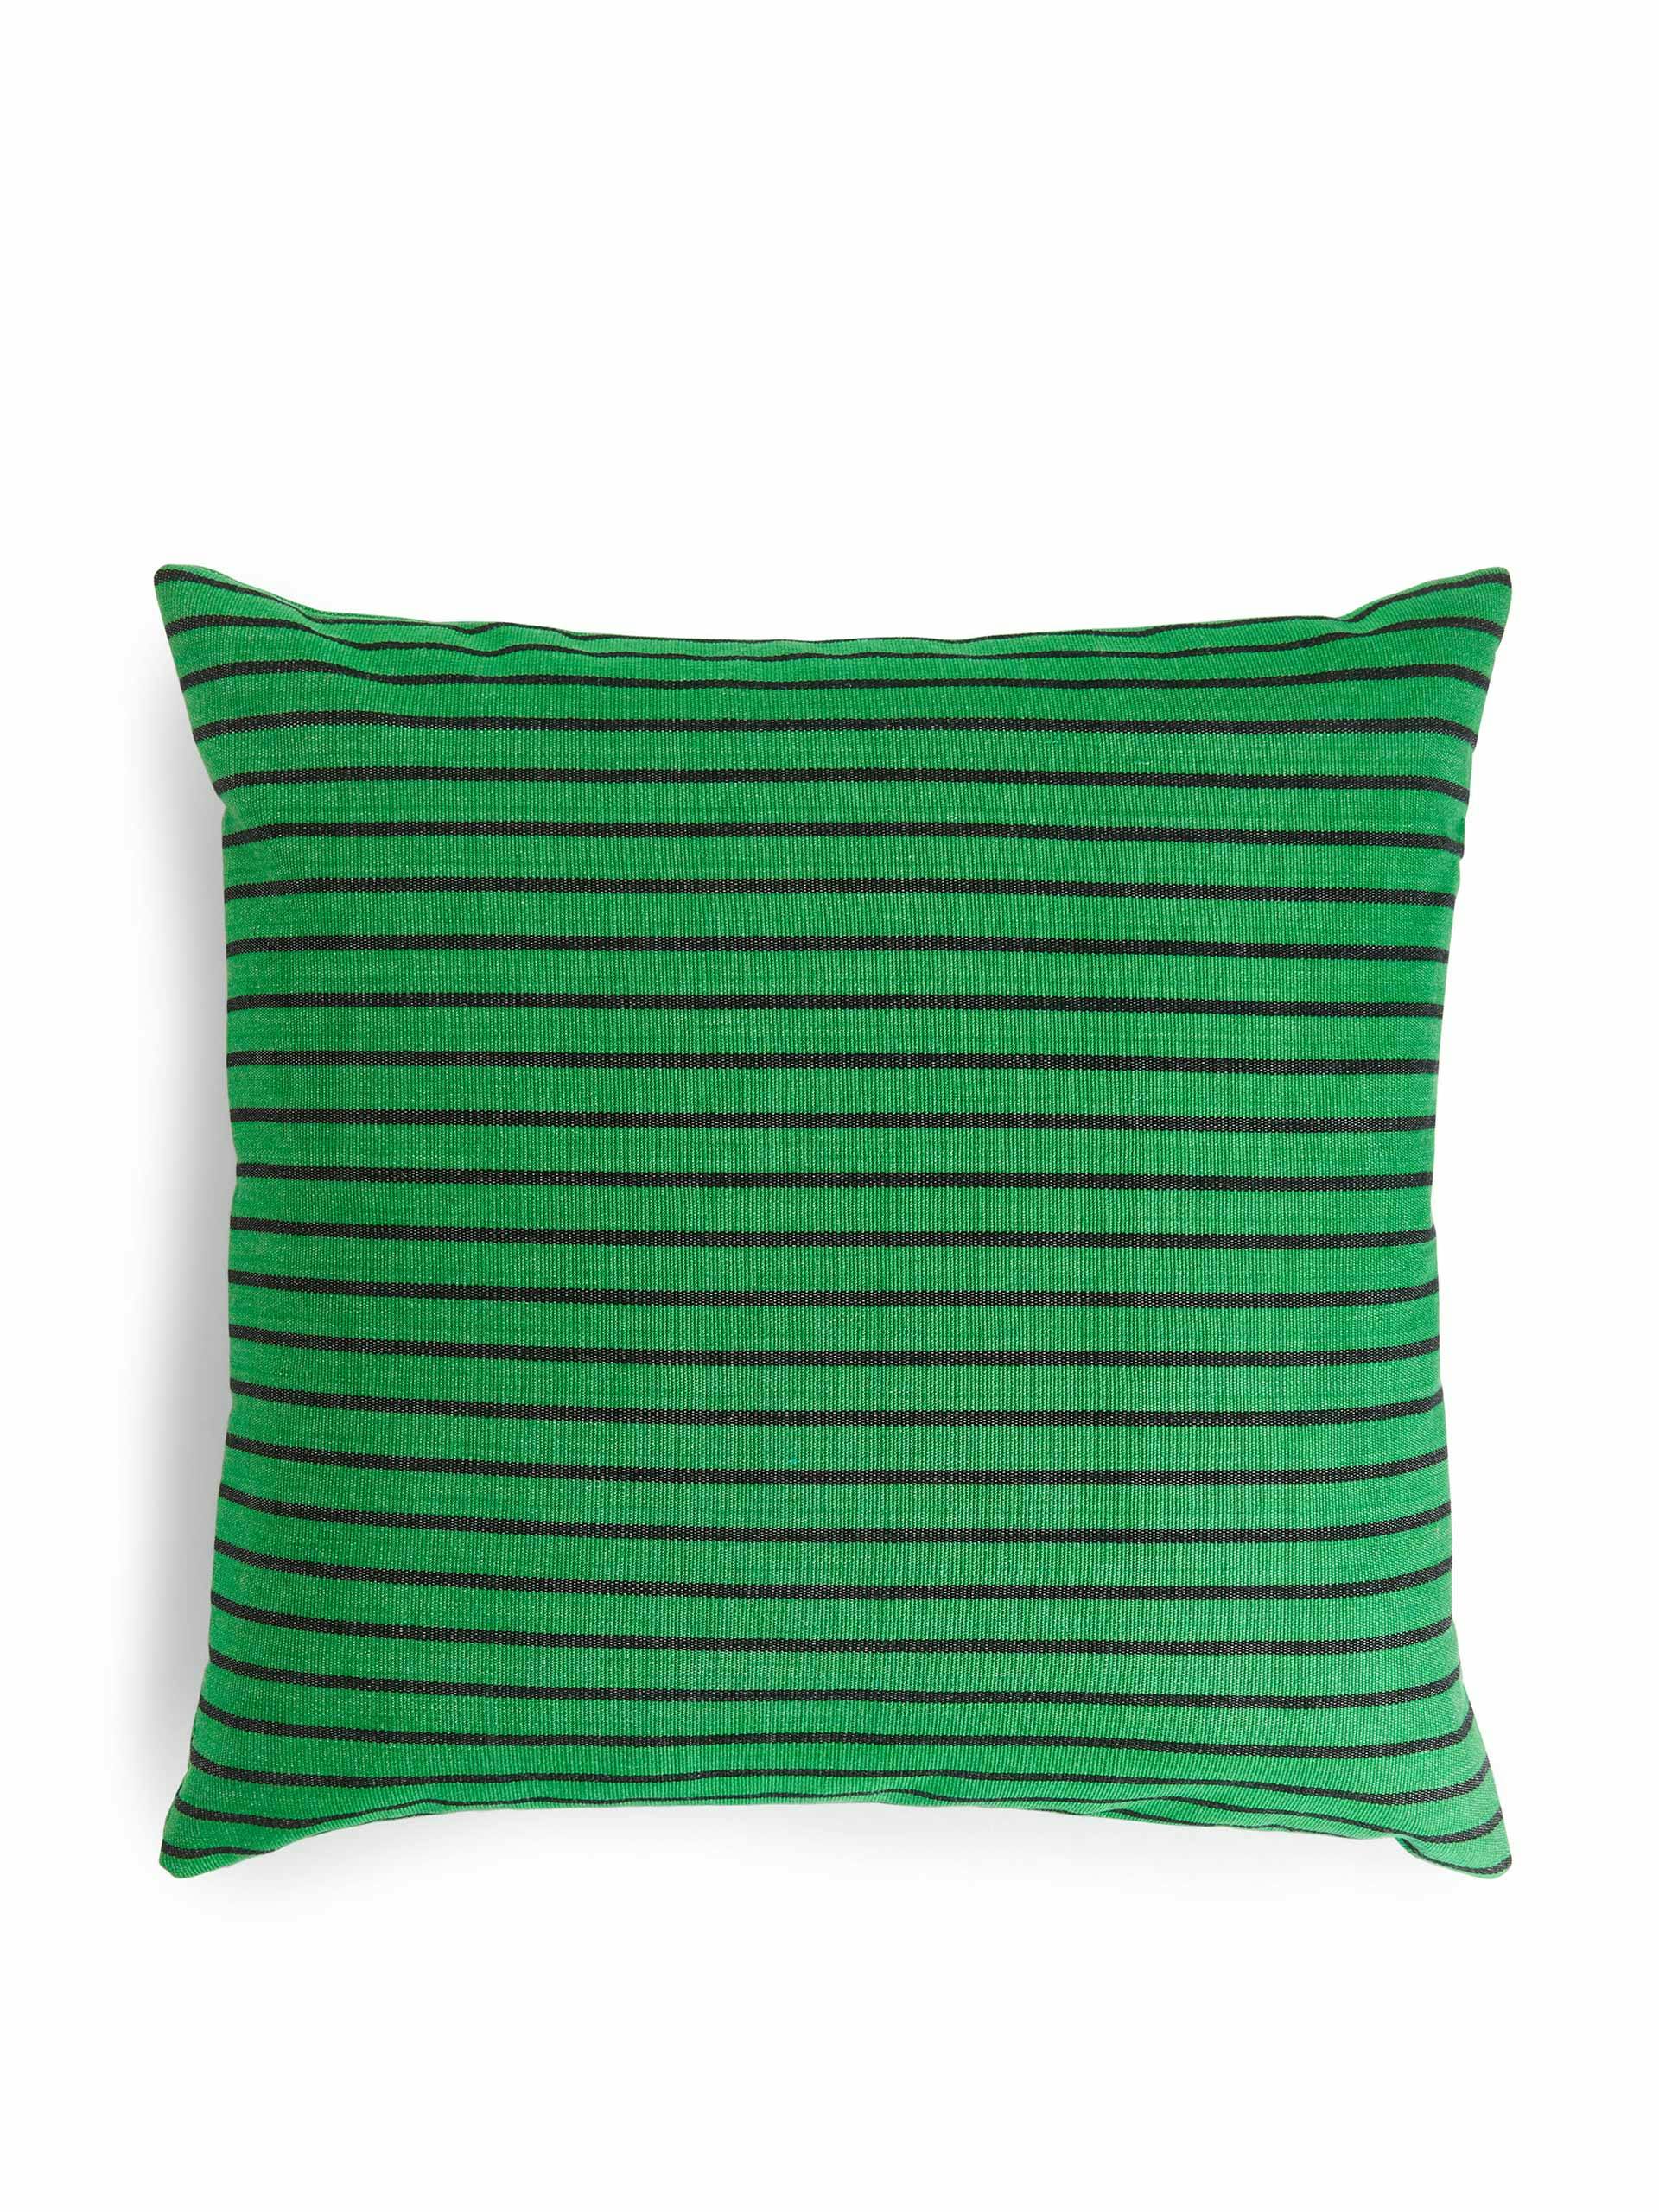 Afroart handwoven striped green cushion cover